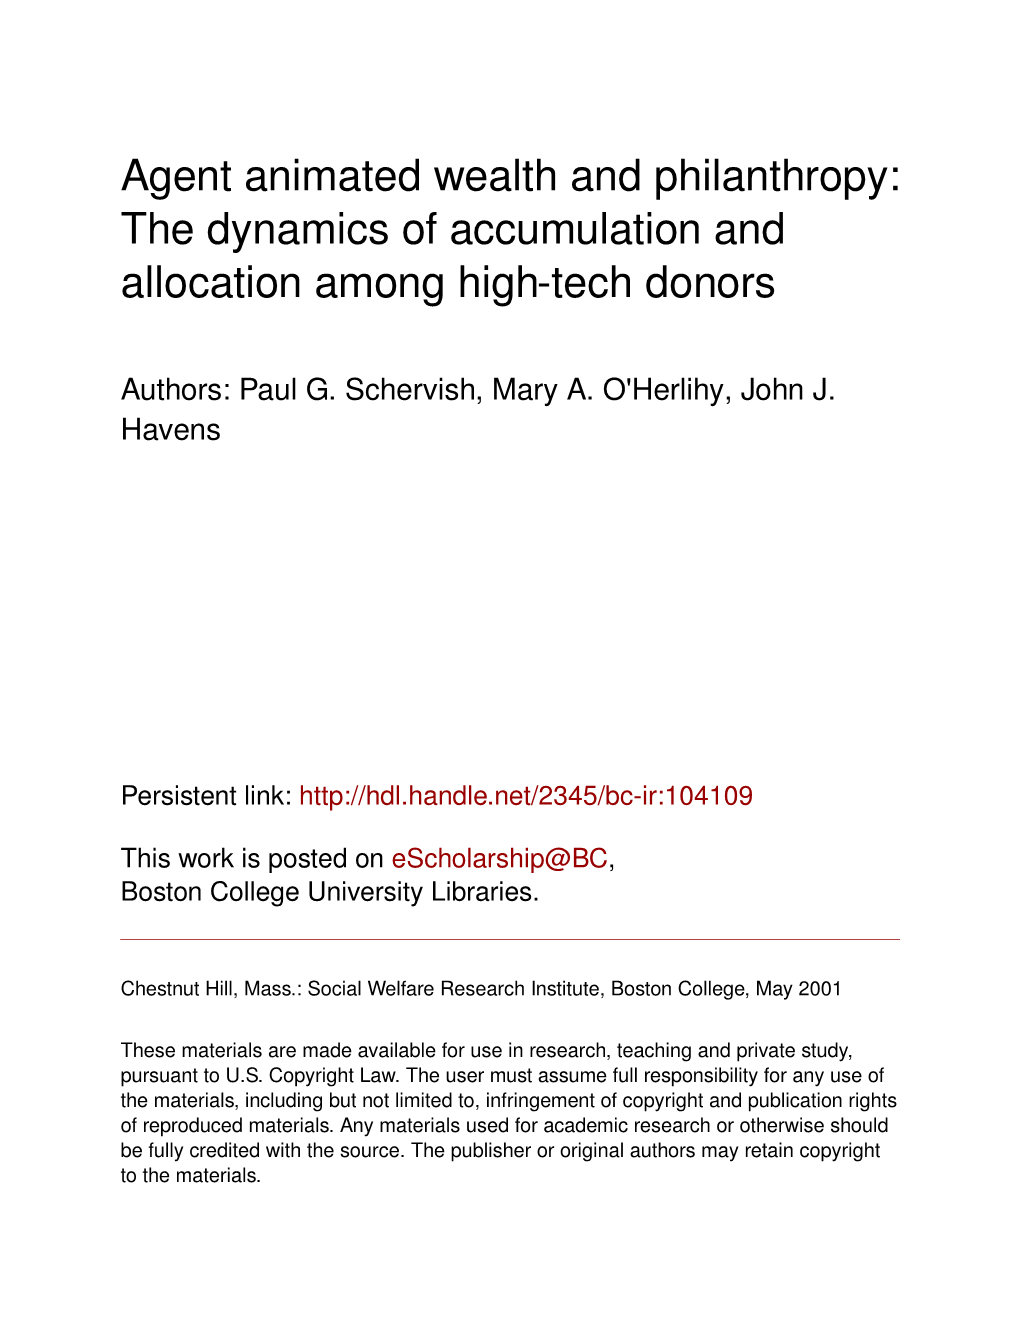 Agent Animated Wealth and Philanthropy: the Dynamics of Accumulation and Allocation Among High-Tech Donors